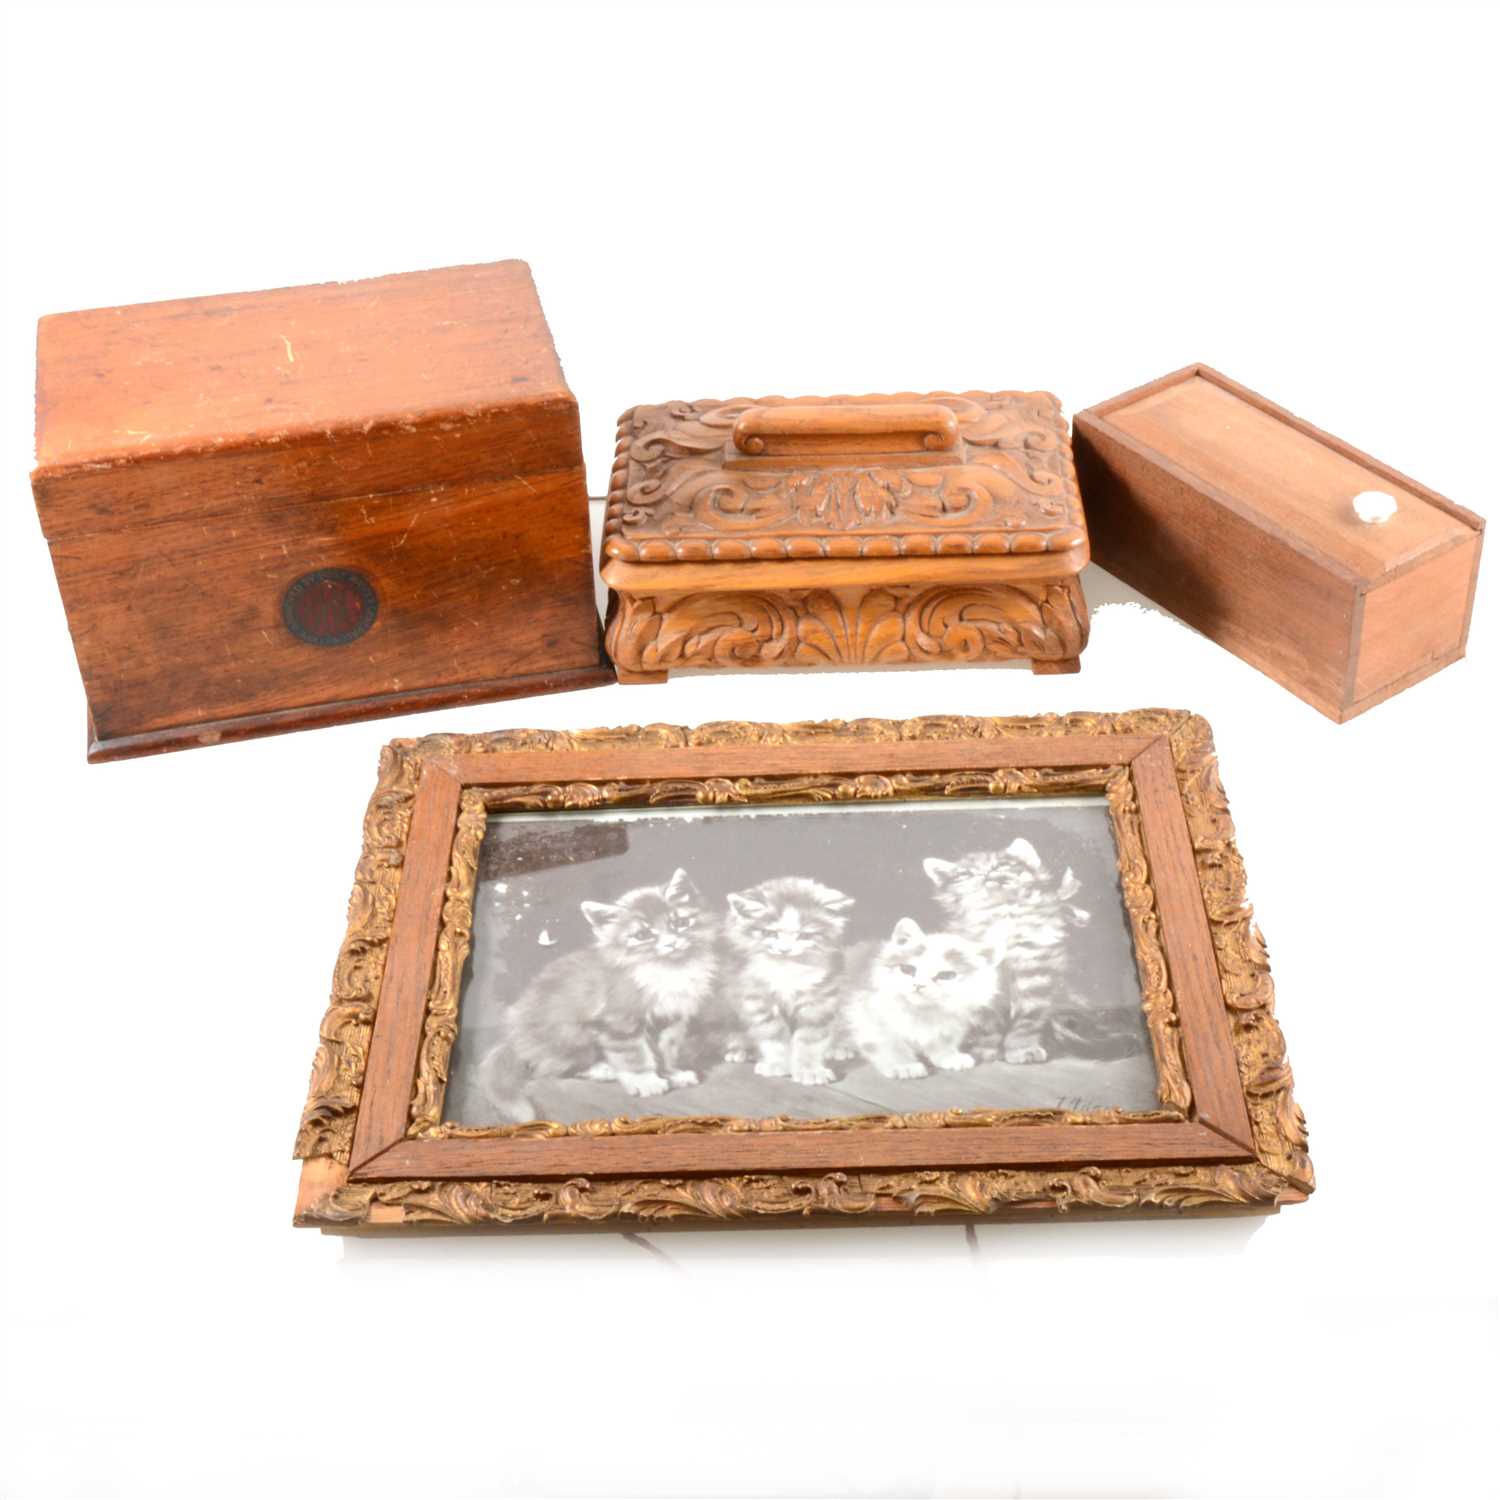 Lot 122 - Four wooden boxes, including a bone-backed domino set, and two photograph frames.